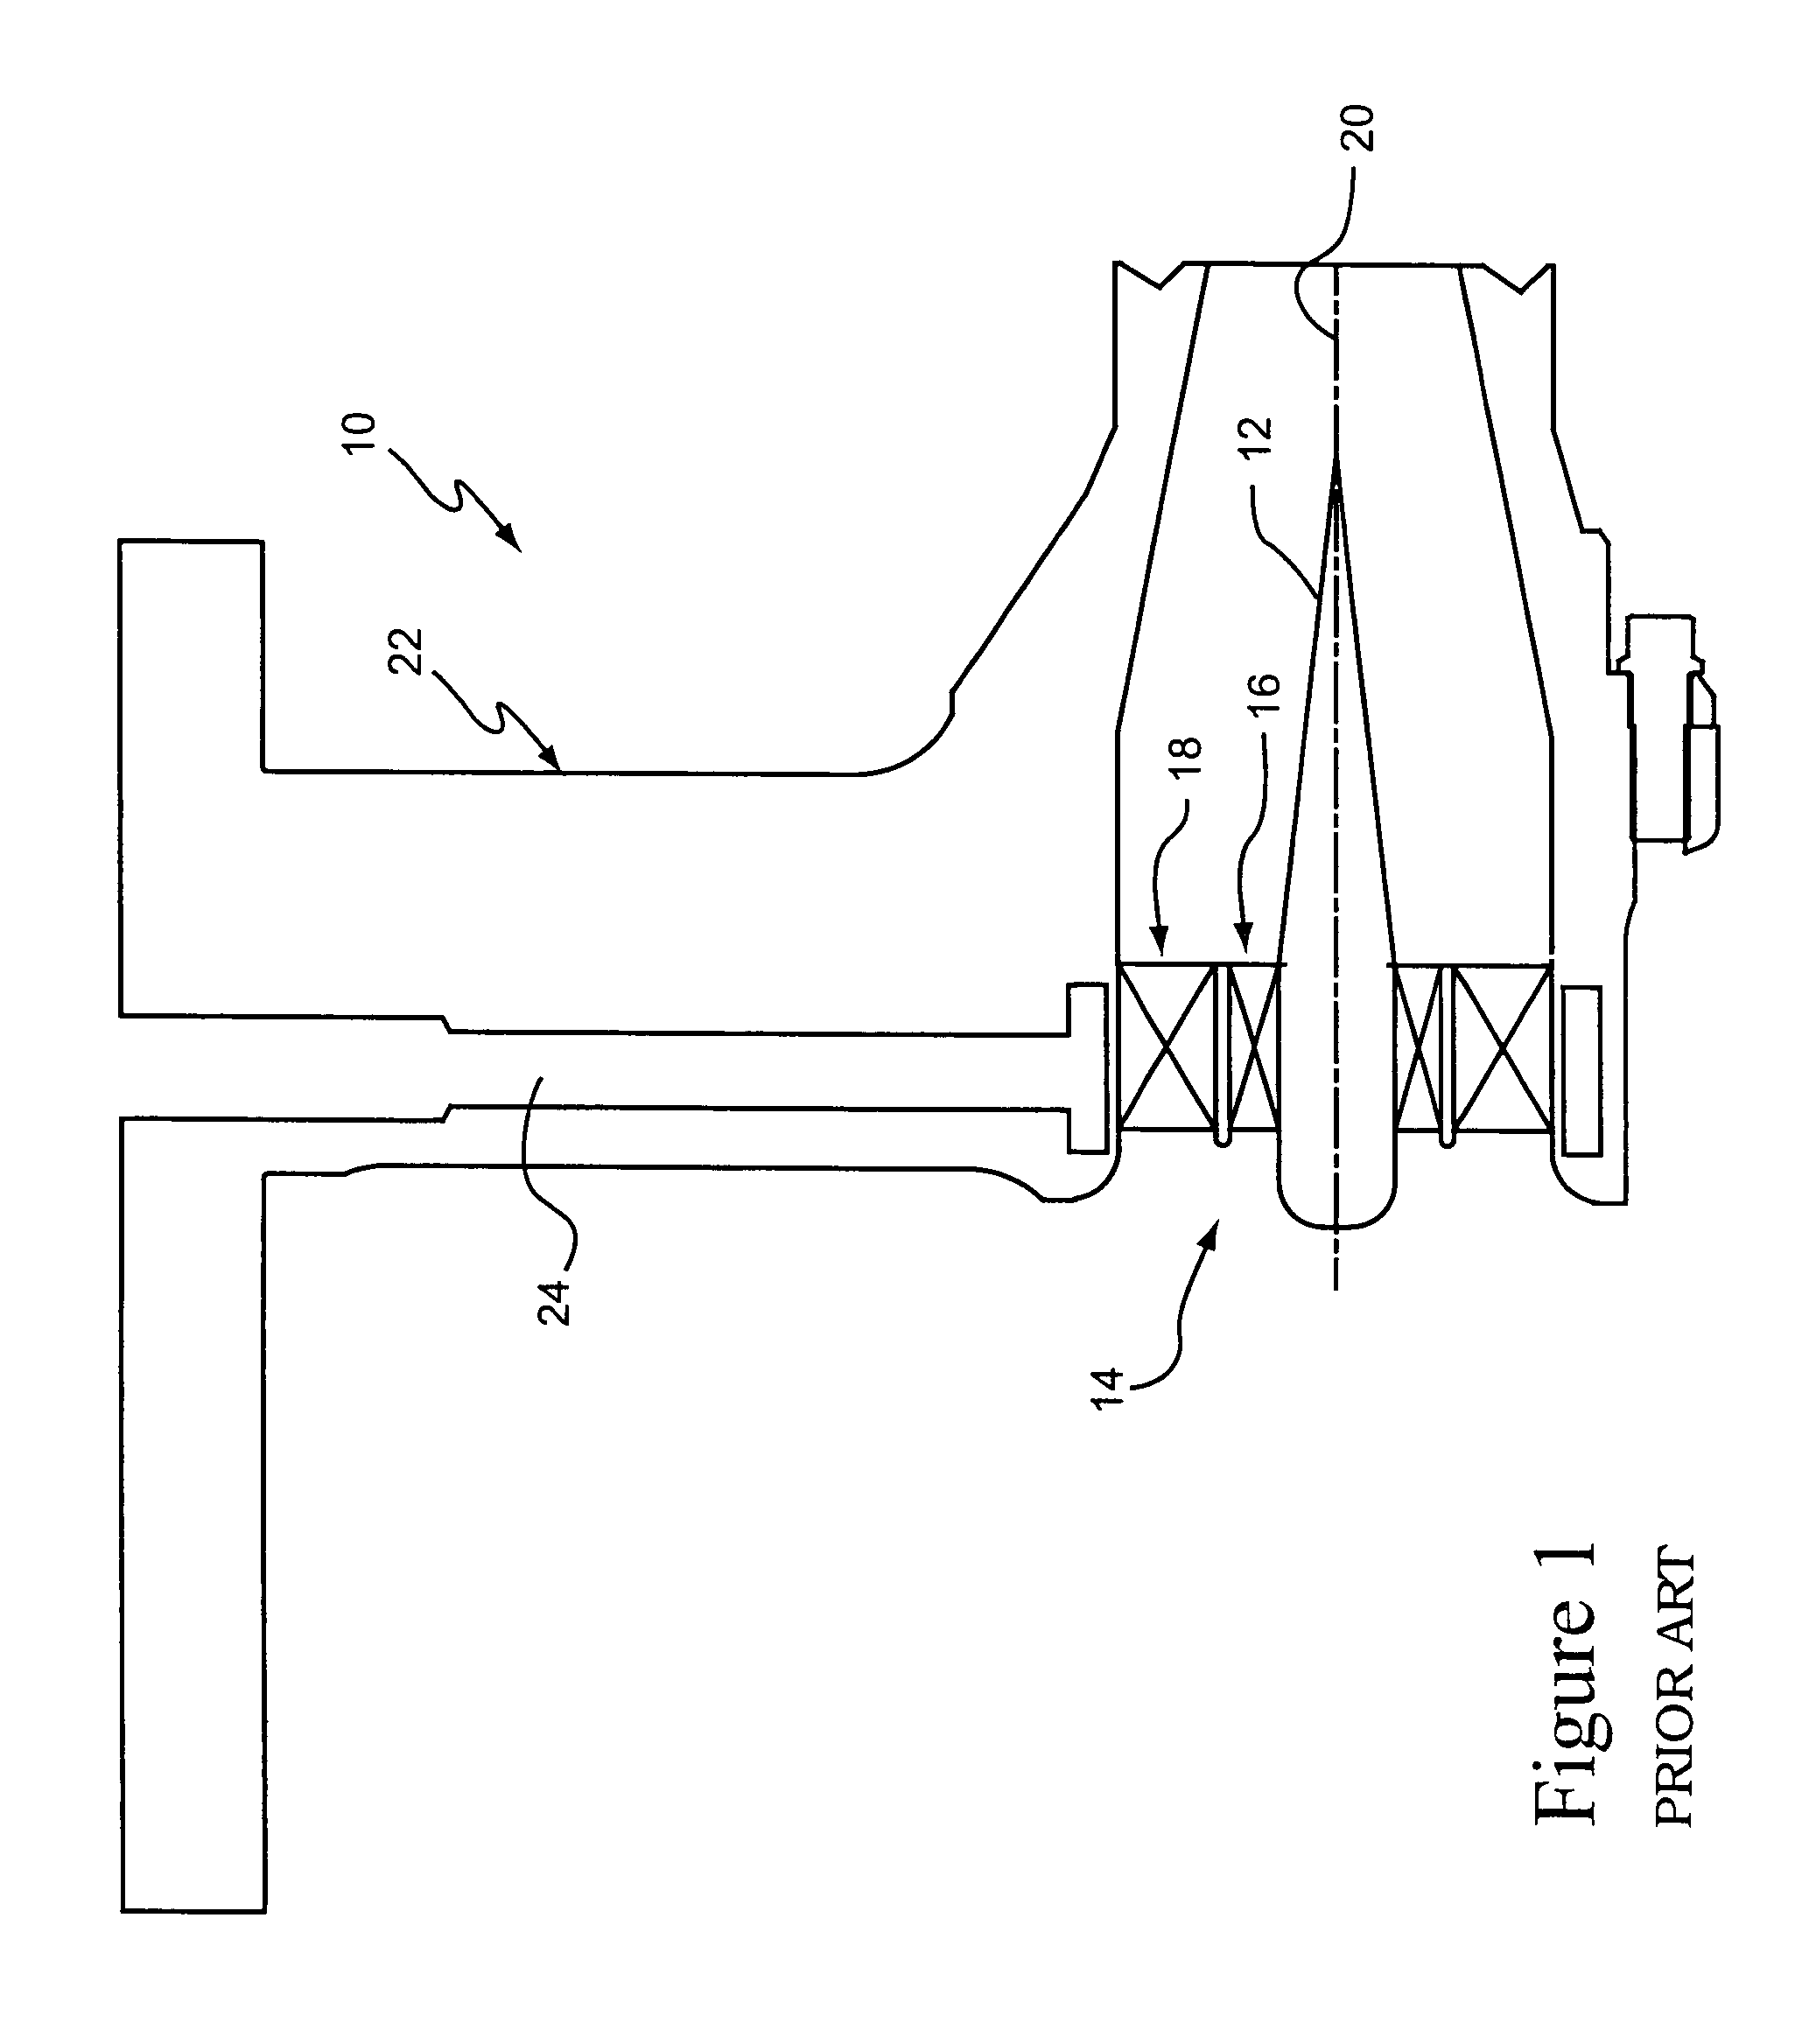 Burner tube and method for mixing air and gas in a gas turbine engine